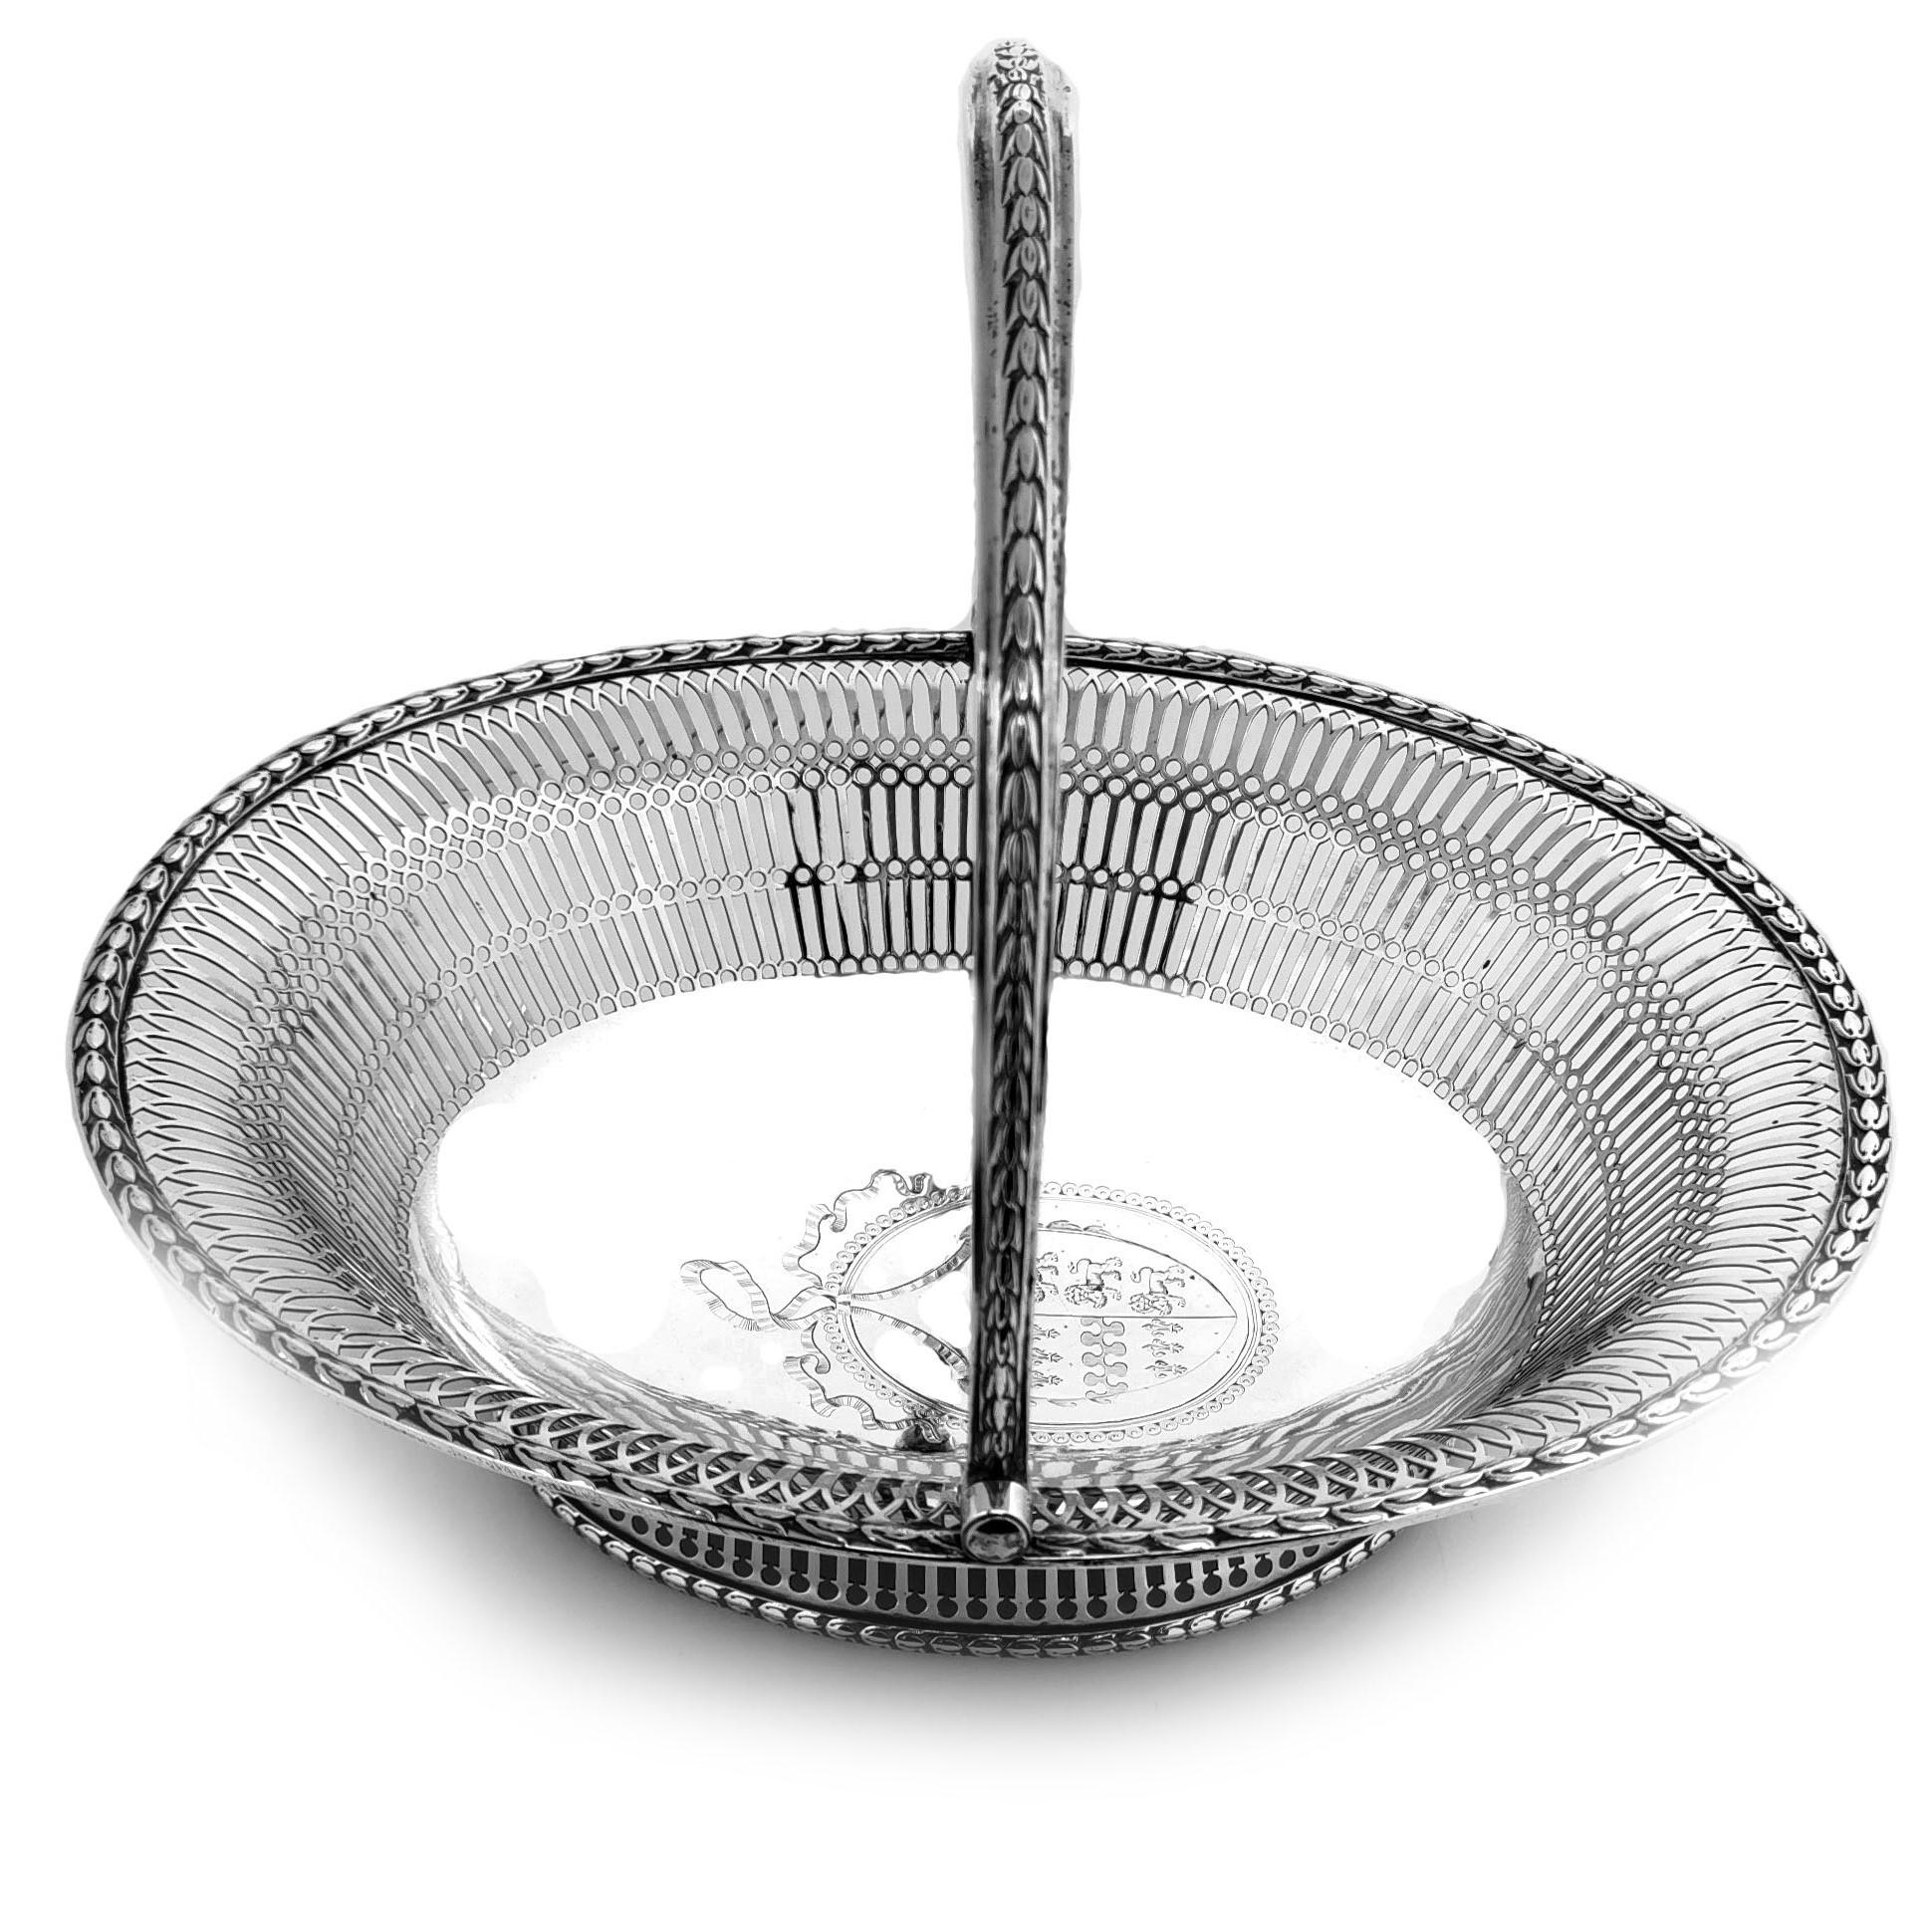 Antique Georgian Sterling Silver Basket 1774 Cake Bread Serving Swing Handle In Good Condition For Sale In London, GB